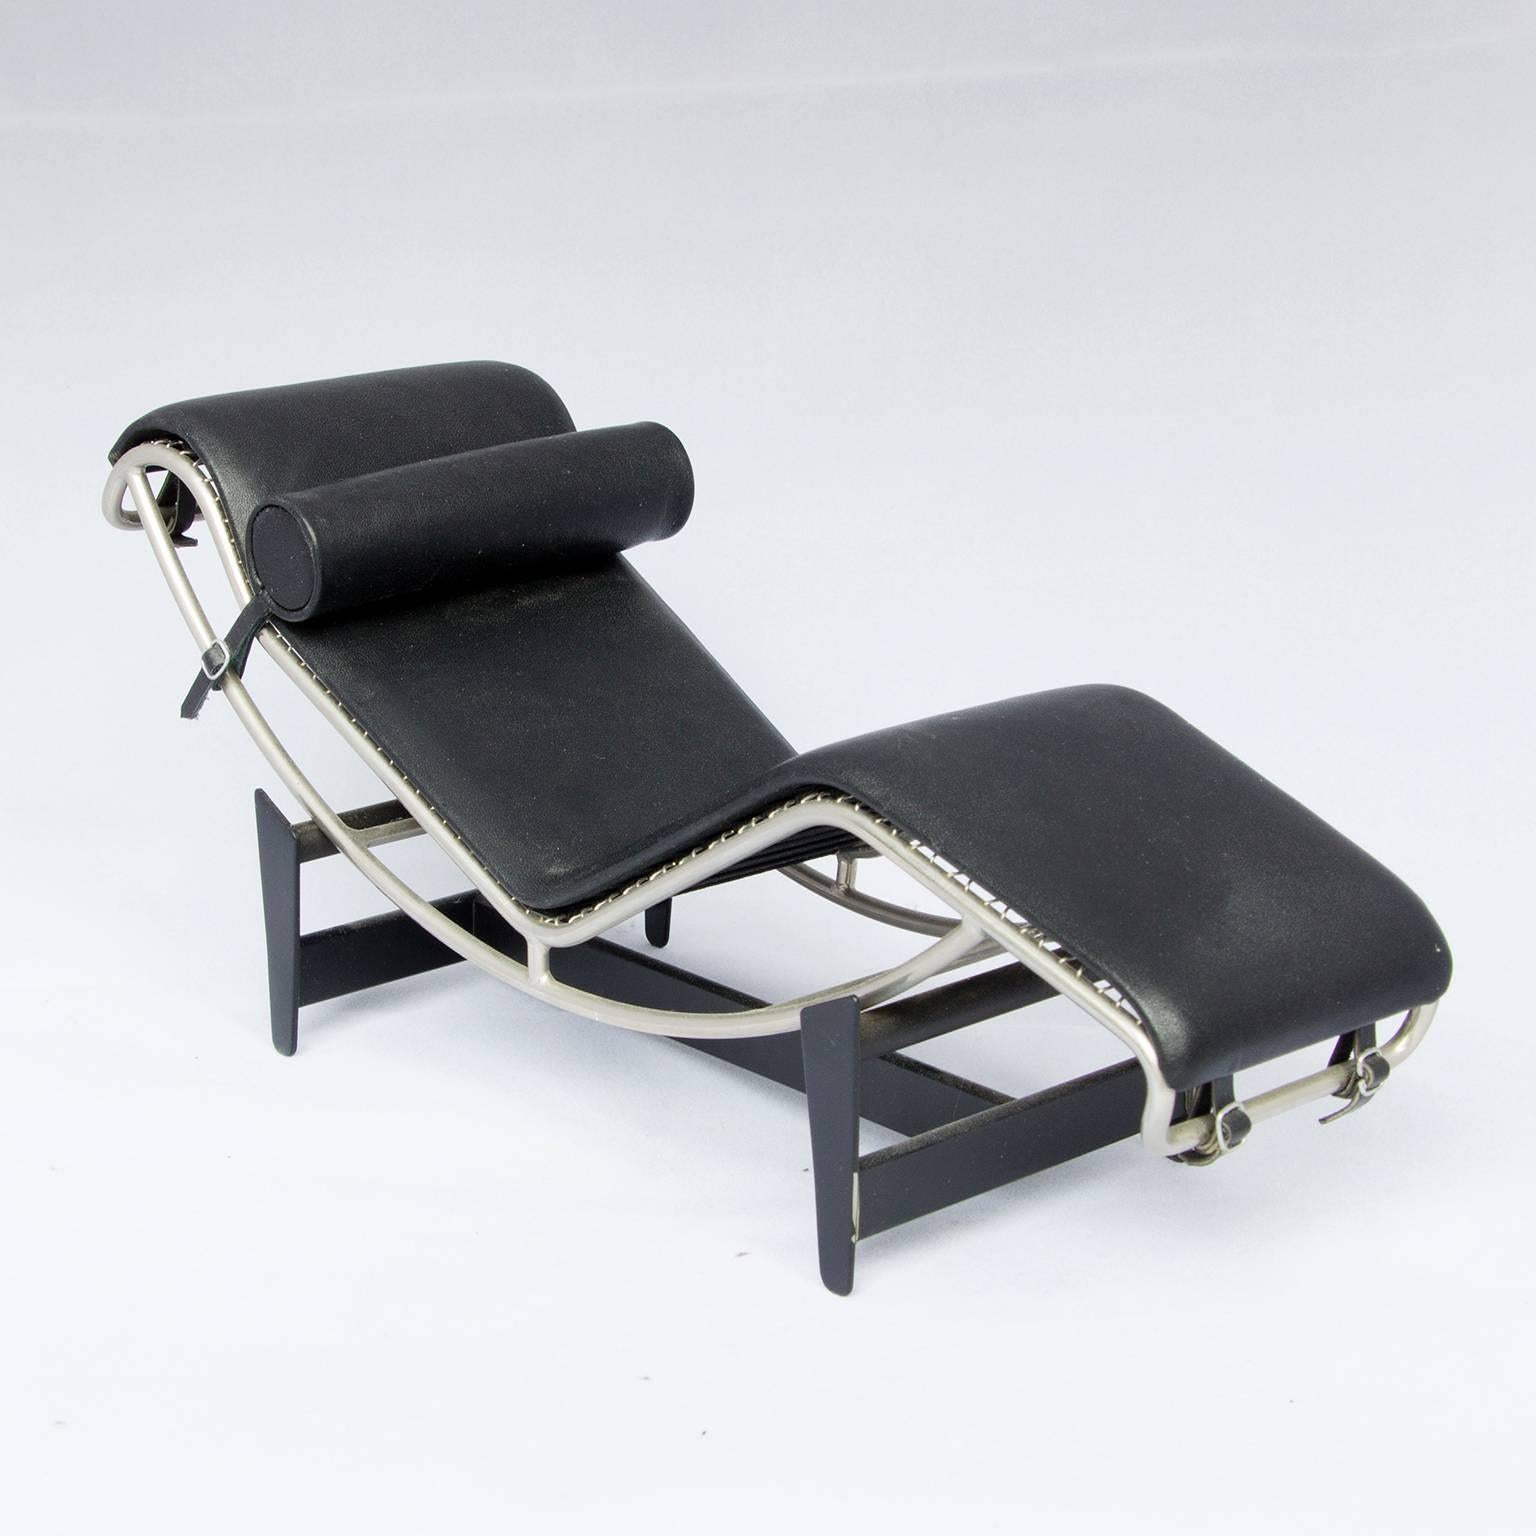 Miniature chaise longue of Le Corbusier, Vitra. 
Beautiful details like buckles and straps. 
In excellent condition. 

Weight of the chaise longue 543 gram. 
Weight of chaise longue in box 1060 gram.
Dimensions of the box 14 cm H x 28 cm L x